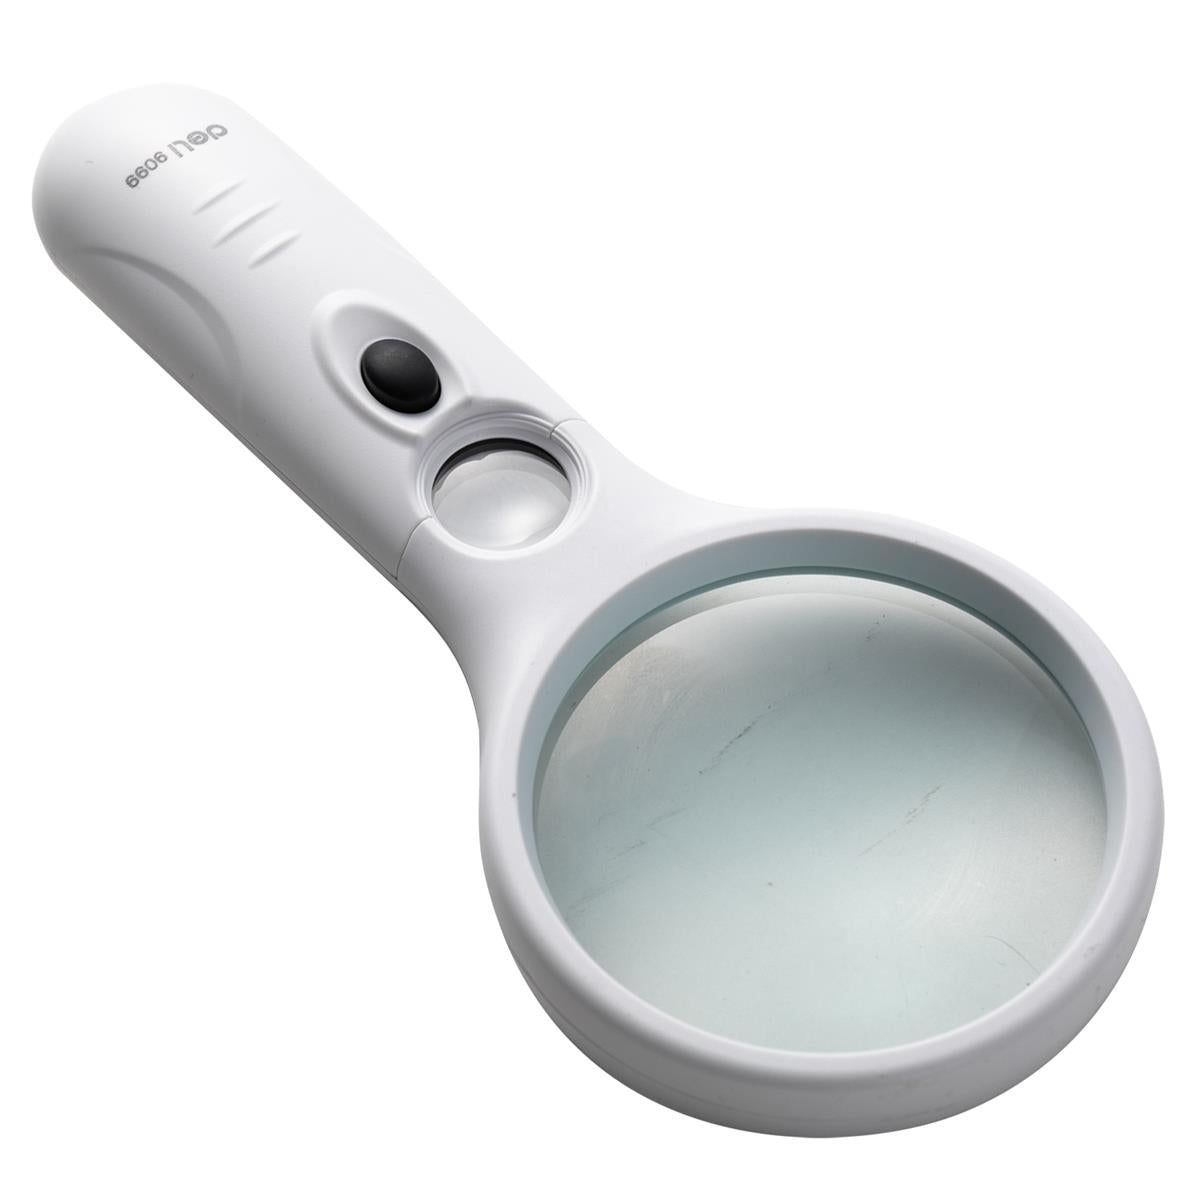 Deli Magnifying Glass 75mm with LED Light E9099